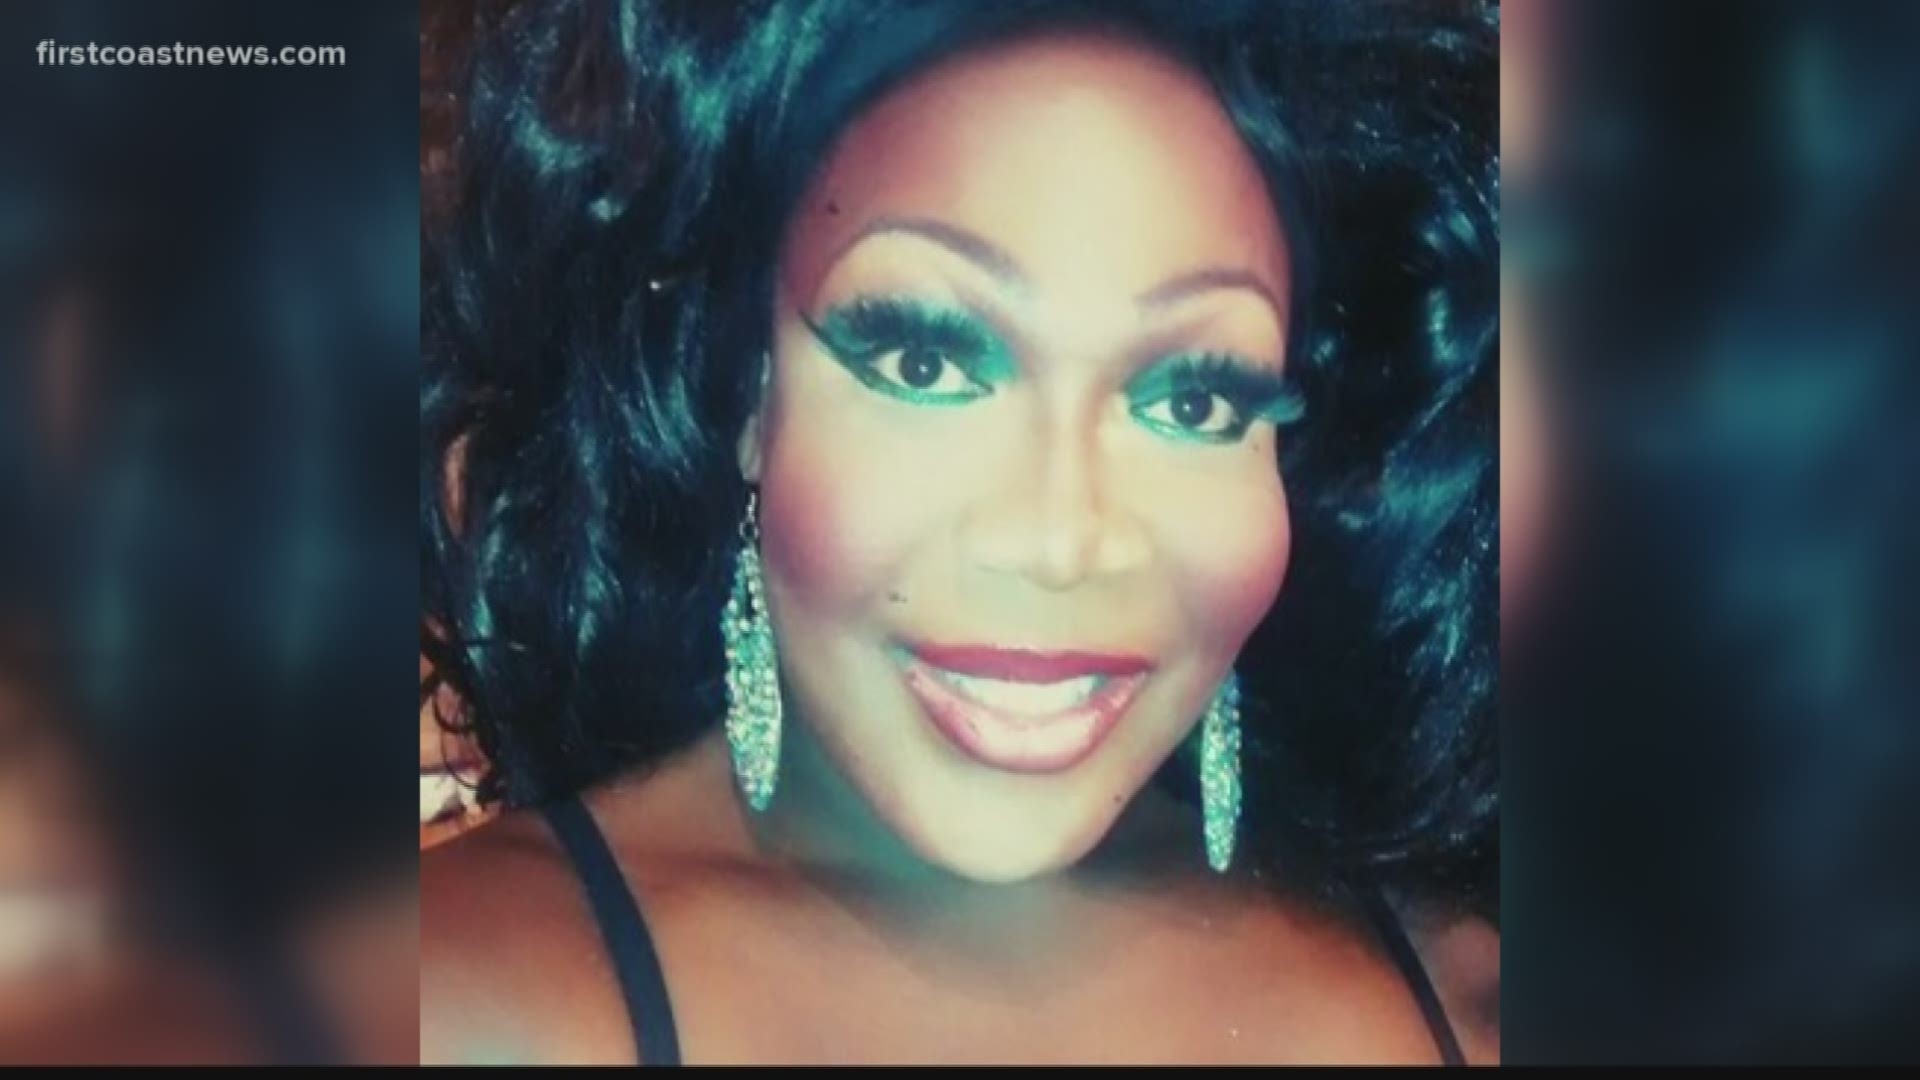 We've learned more about the victim of a deadly shooting. She was a transgender woman who worked at a local gay nightclub.